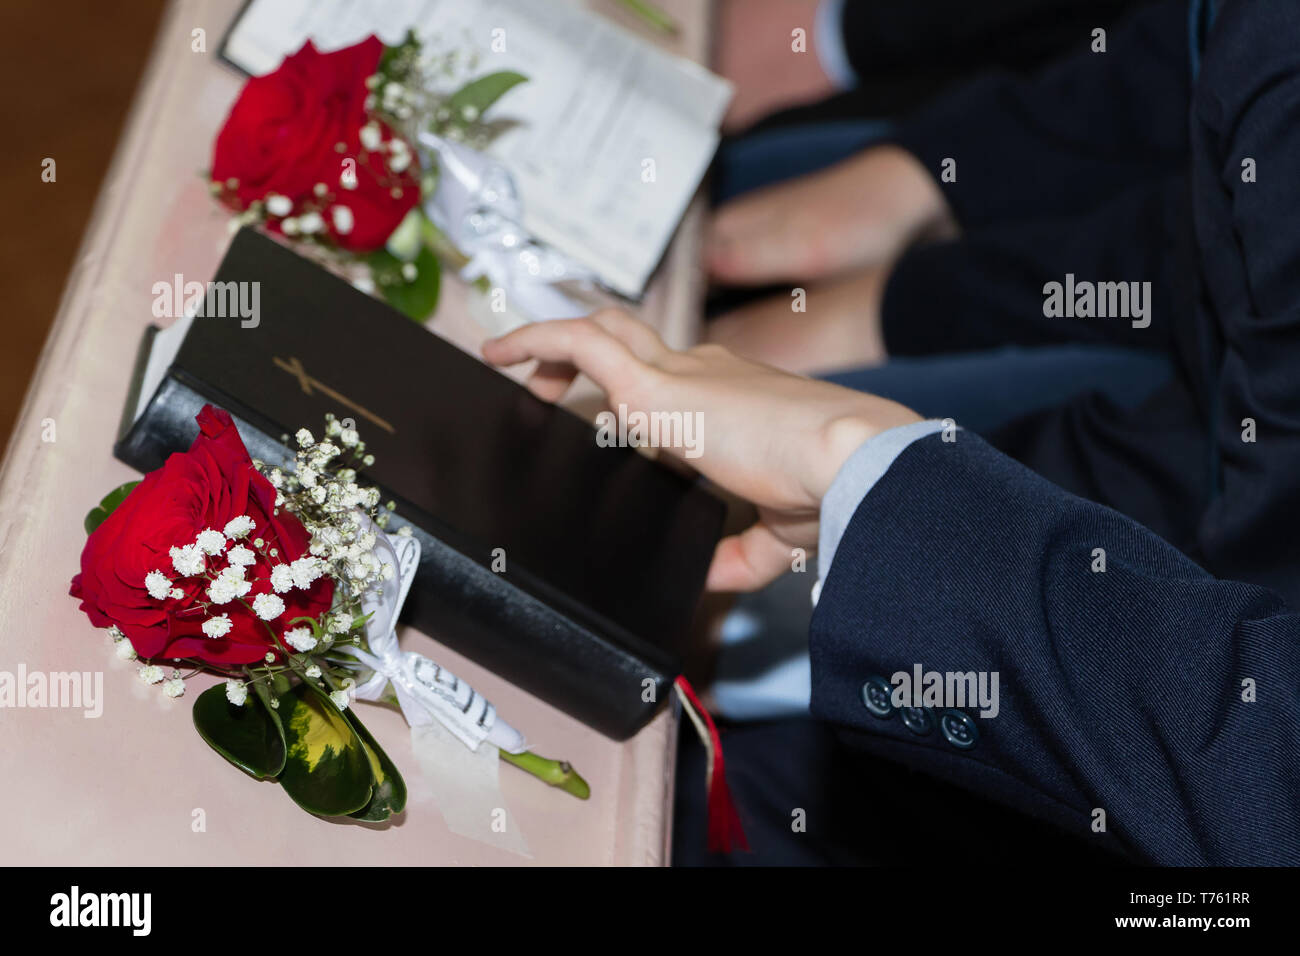 A picture of the Holy Bible with red roses in church Stock Photo